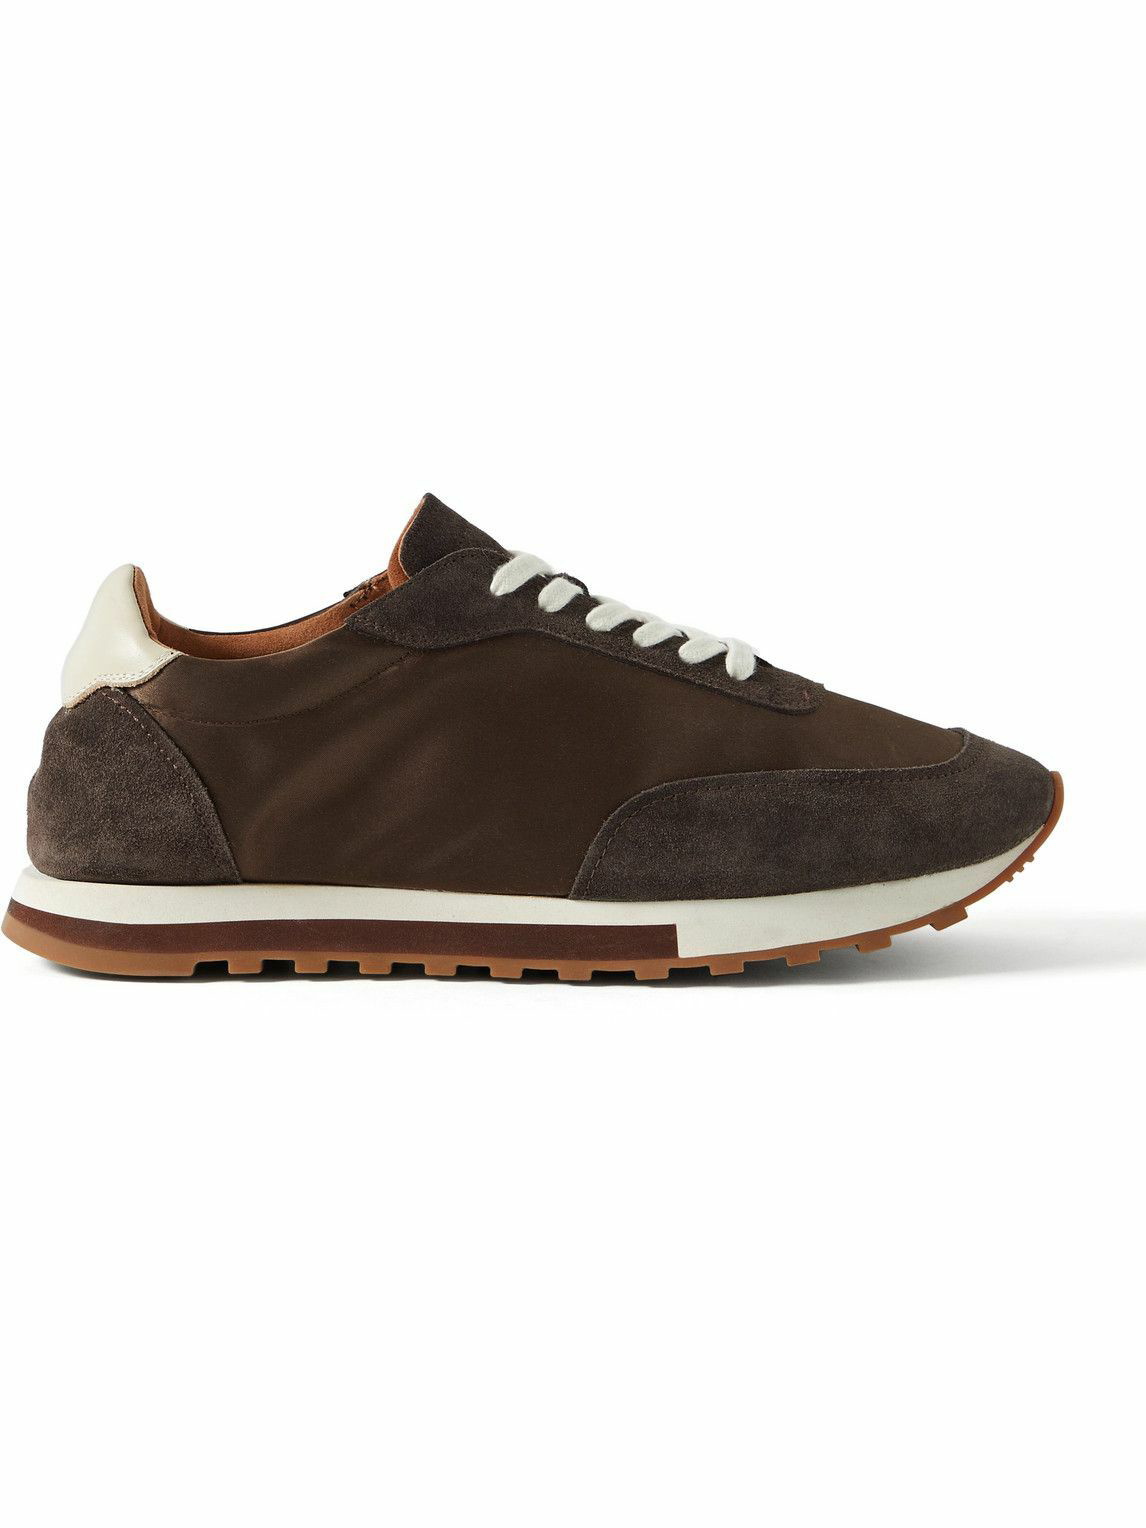 The Row - Owen Suede-Trimmed Nylon Sneakers - Brown The Row